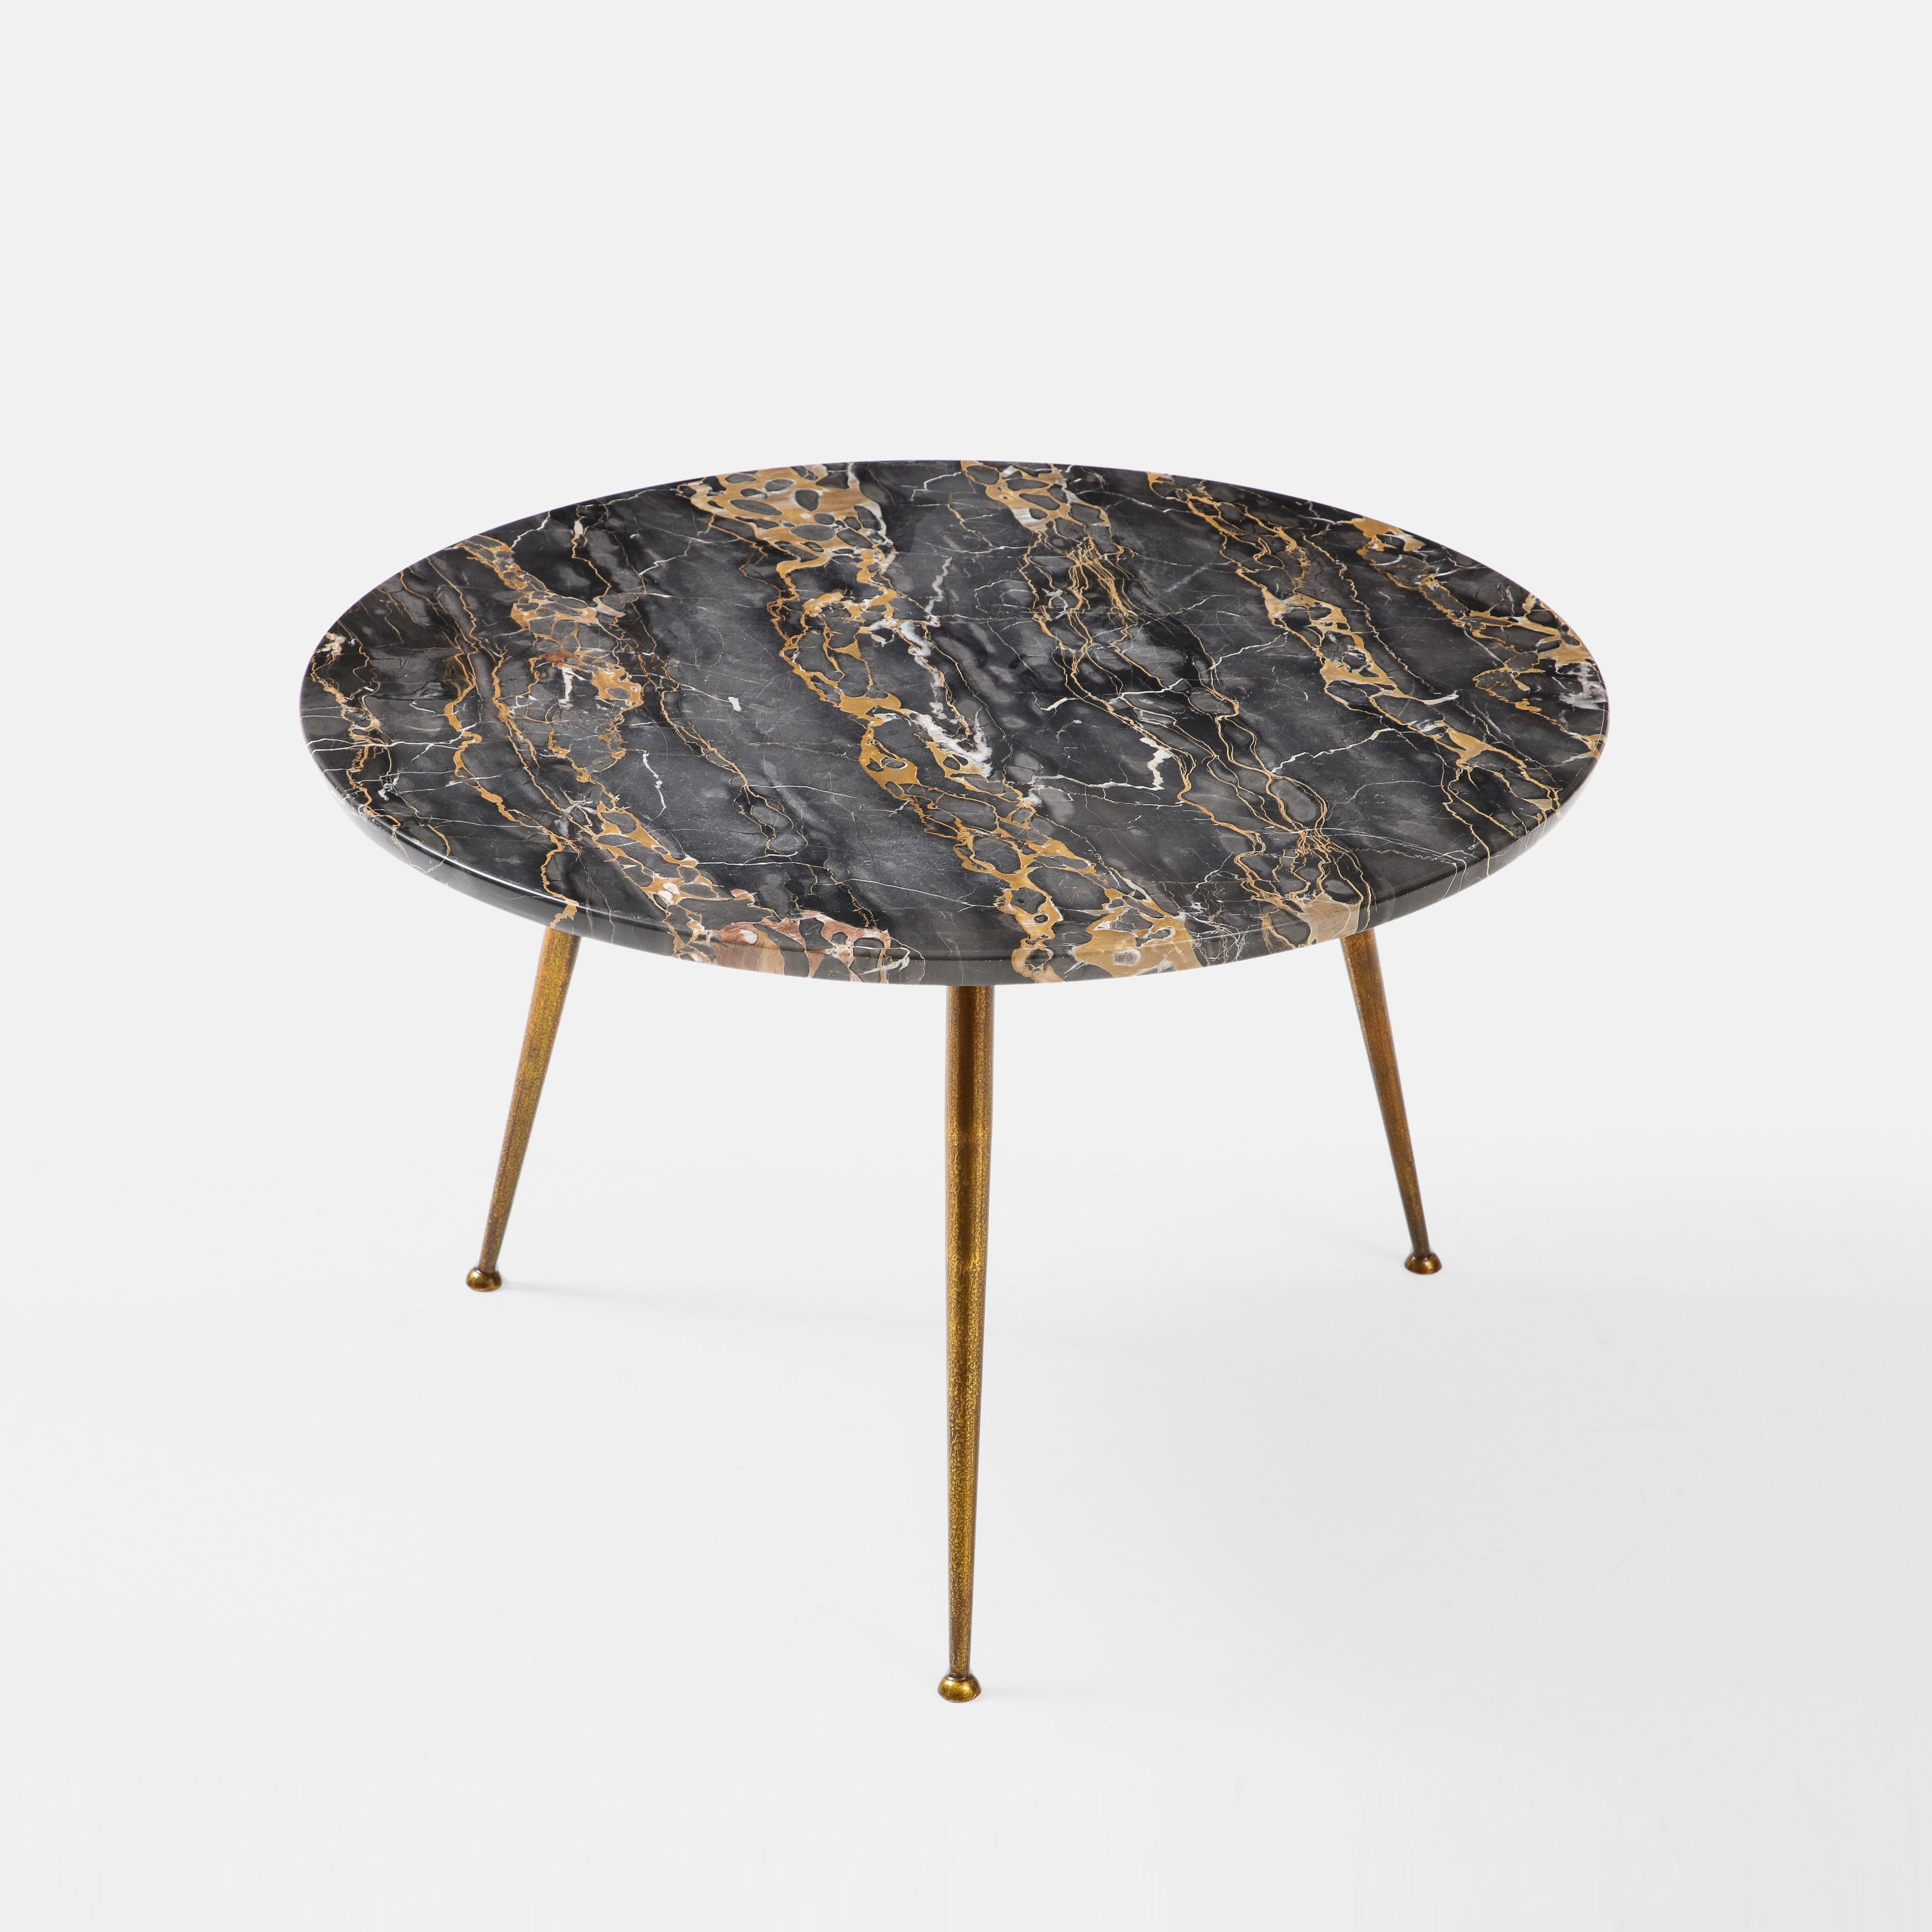 Beautiful small round coffee table with Nero Portoro marble top on tripod gilt metal legs, Italy, 1950s.  This chic marble coffee table exudes the charm and elegance of classic mid-century Italian design.

Nero Portoro marble, also known as black